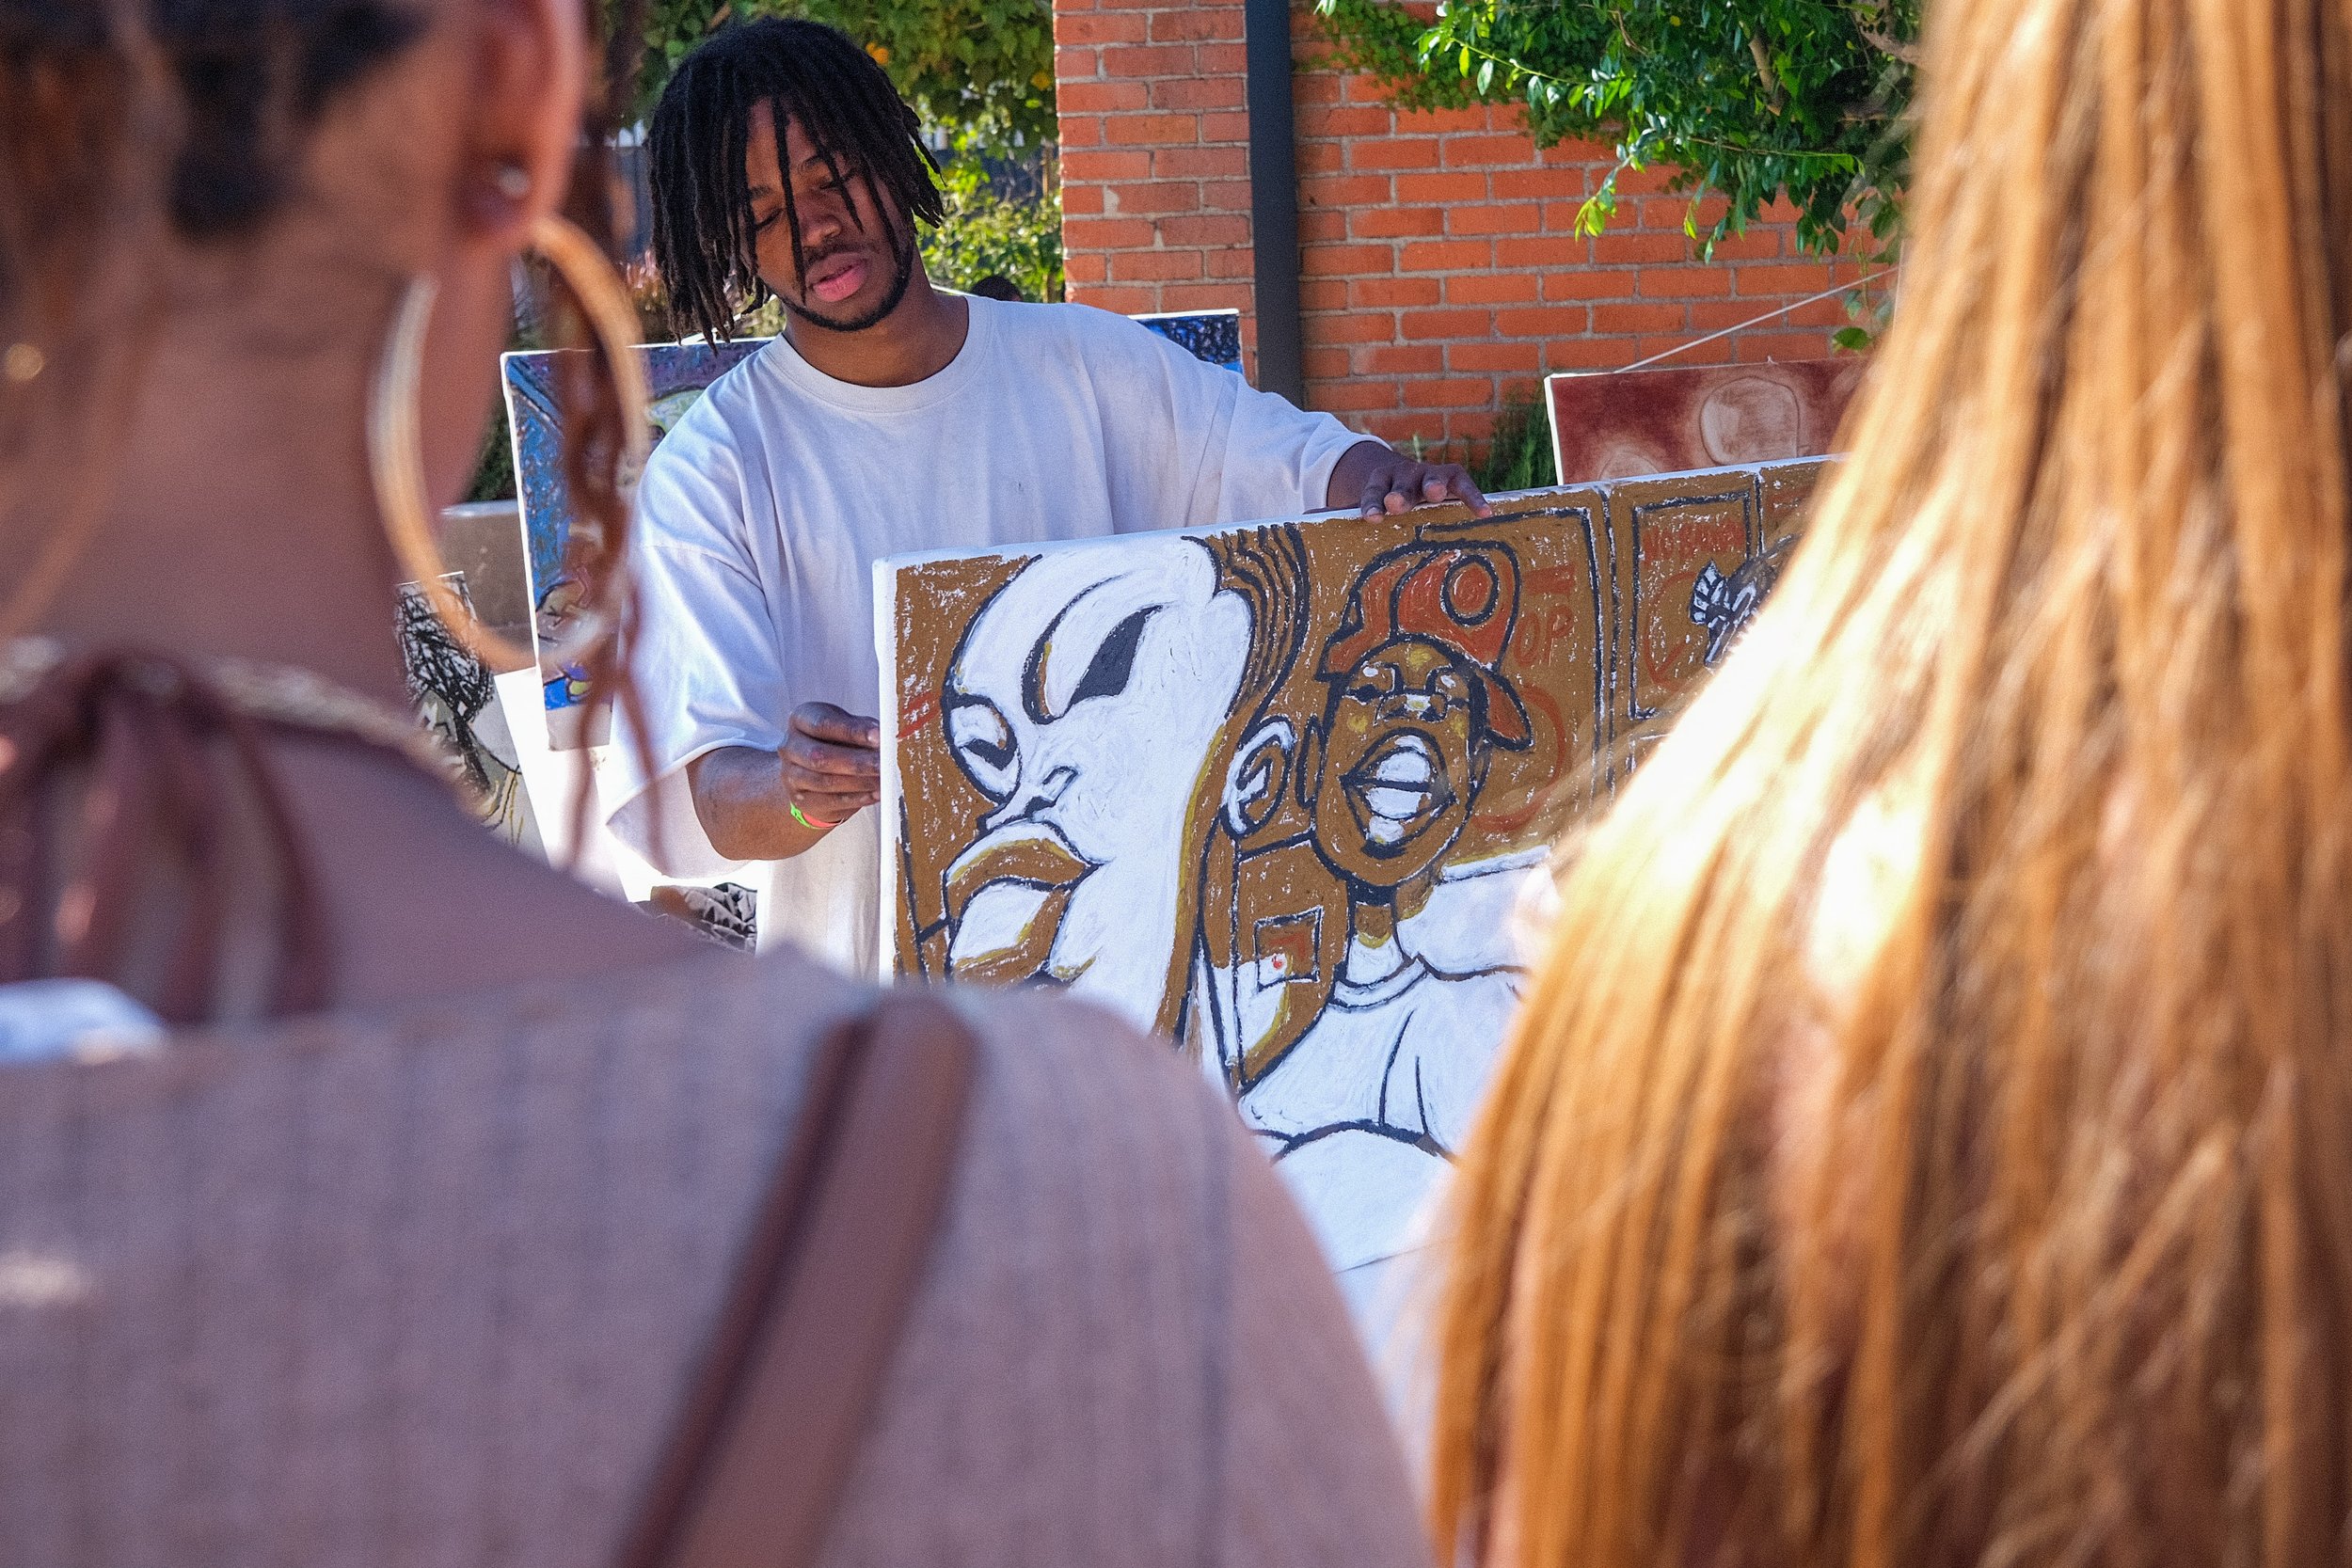  Event-goers watch as Kid Bosco AKA Josiah Davis signs the back of the artwork he finished painting live at the Black Market Flea in Los Angeles, on Sunday, March 27, 2022 (Anna Sophia Moltke | The Corsair) 